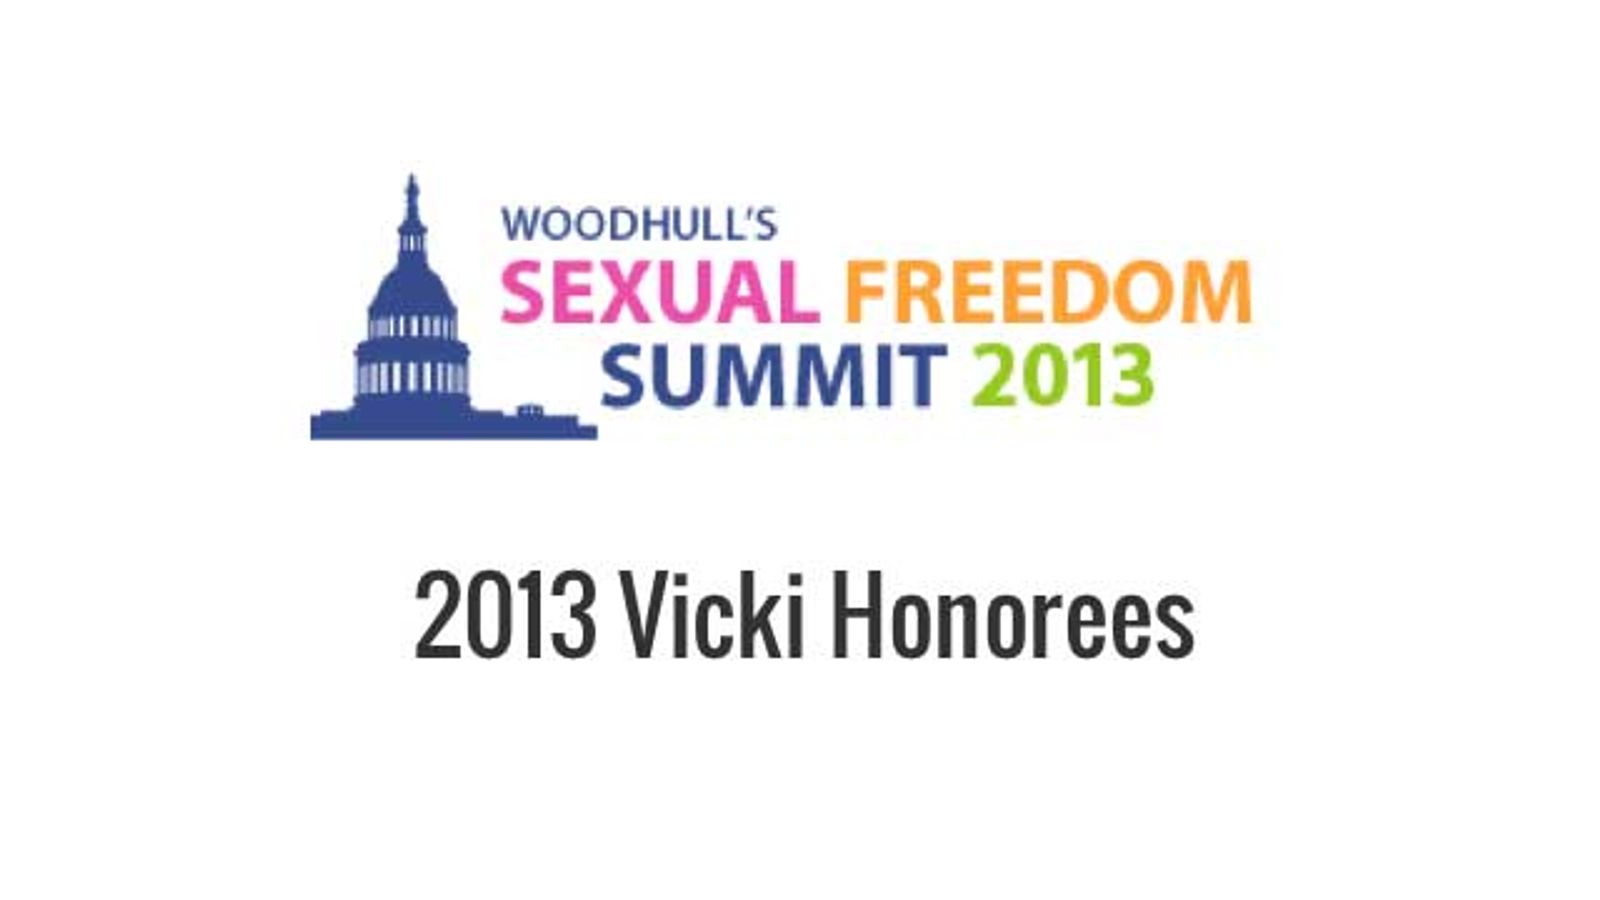 Woodhull Announces Sexual Freedom Honorees for 2013